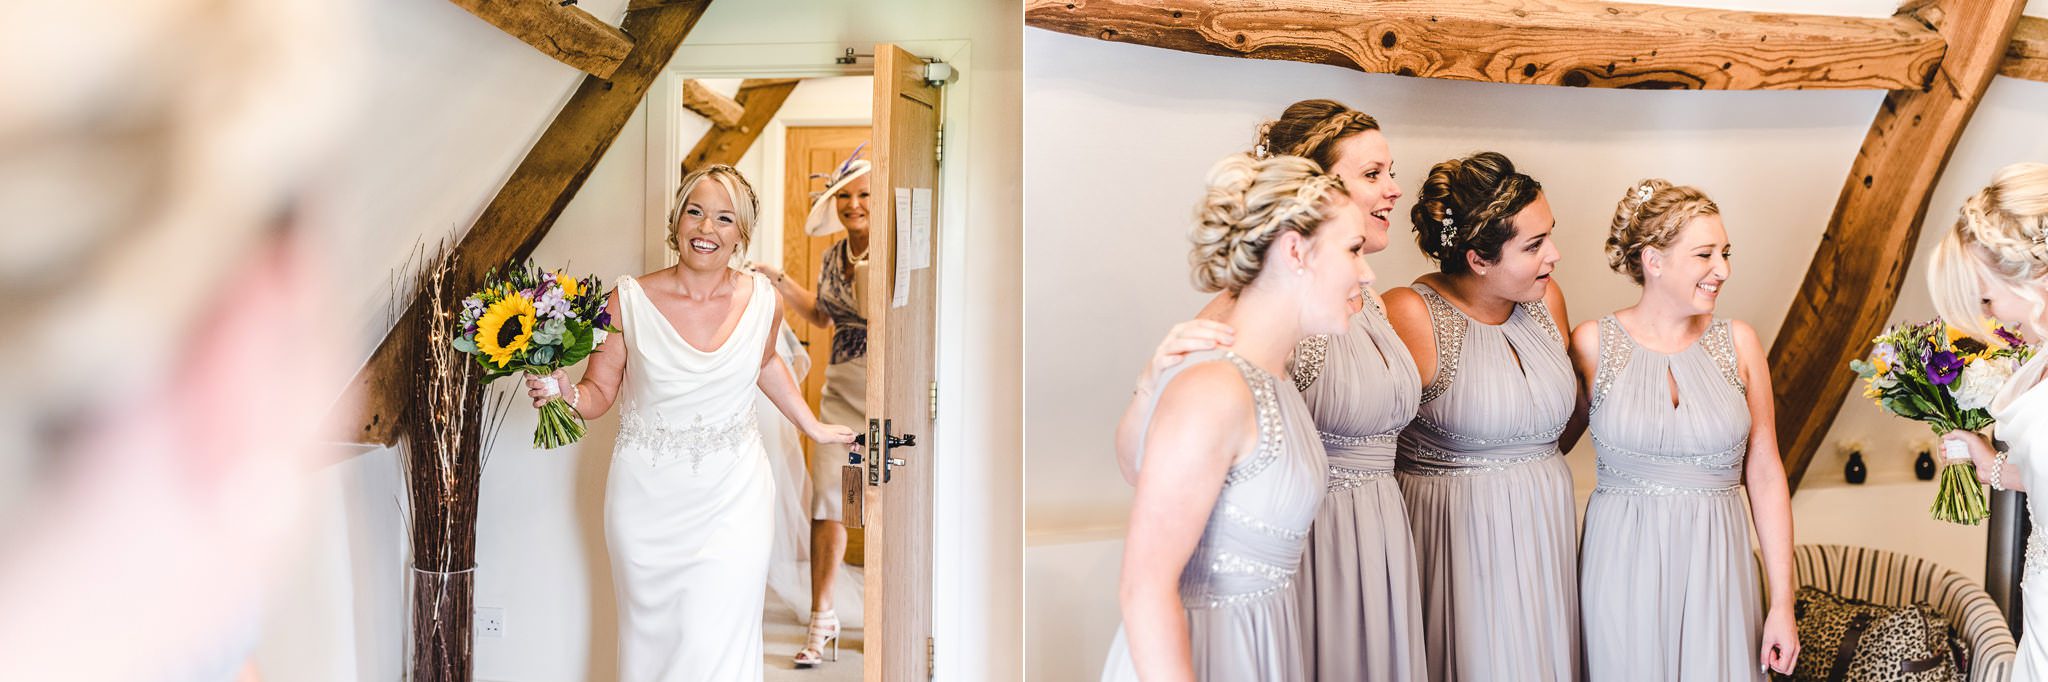 A Kingscote Barn bride seeing her bridesmaids on her wedding day